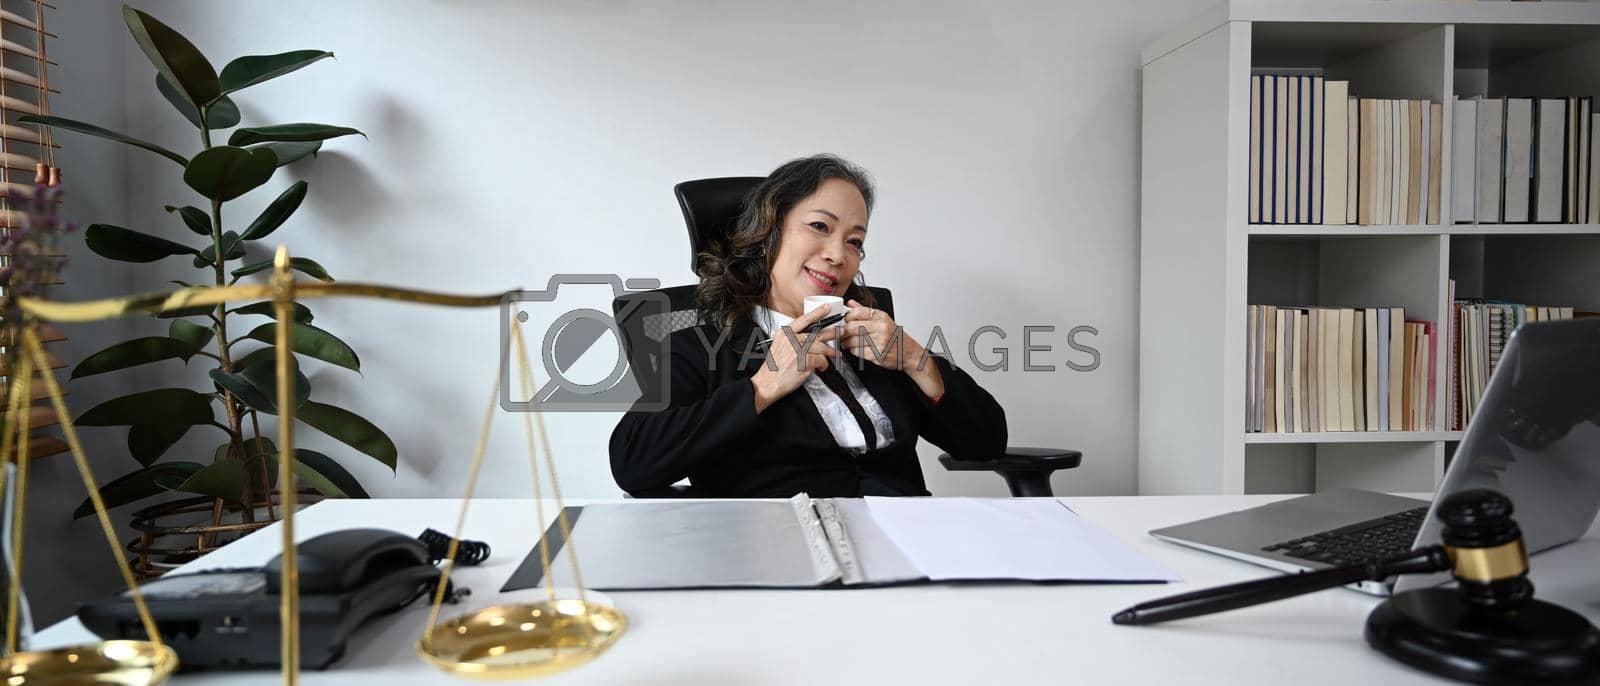 Royalty free image of Mature female lawyer drinking coffee, resting at her personal office by prathanchorruangsak